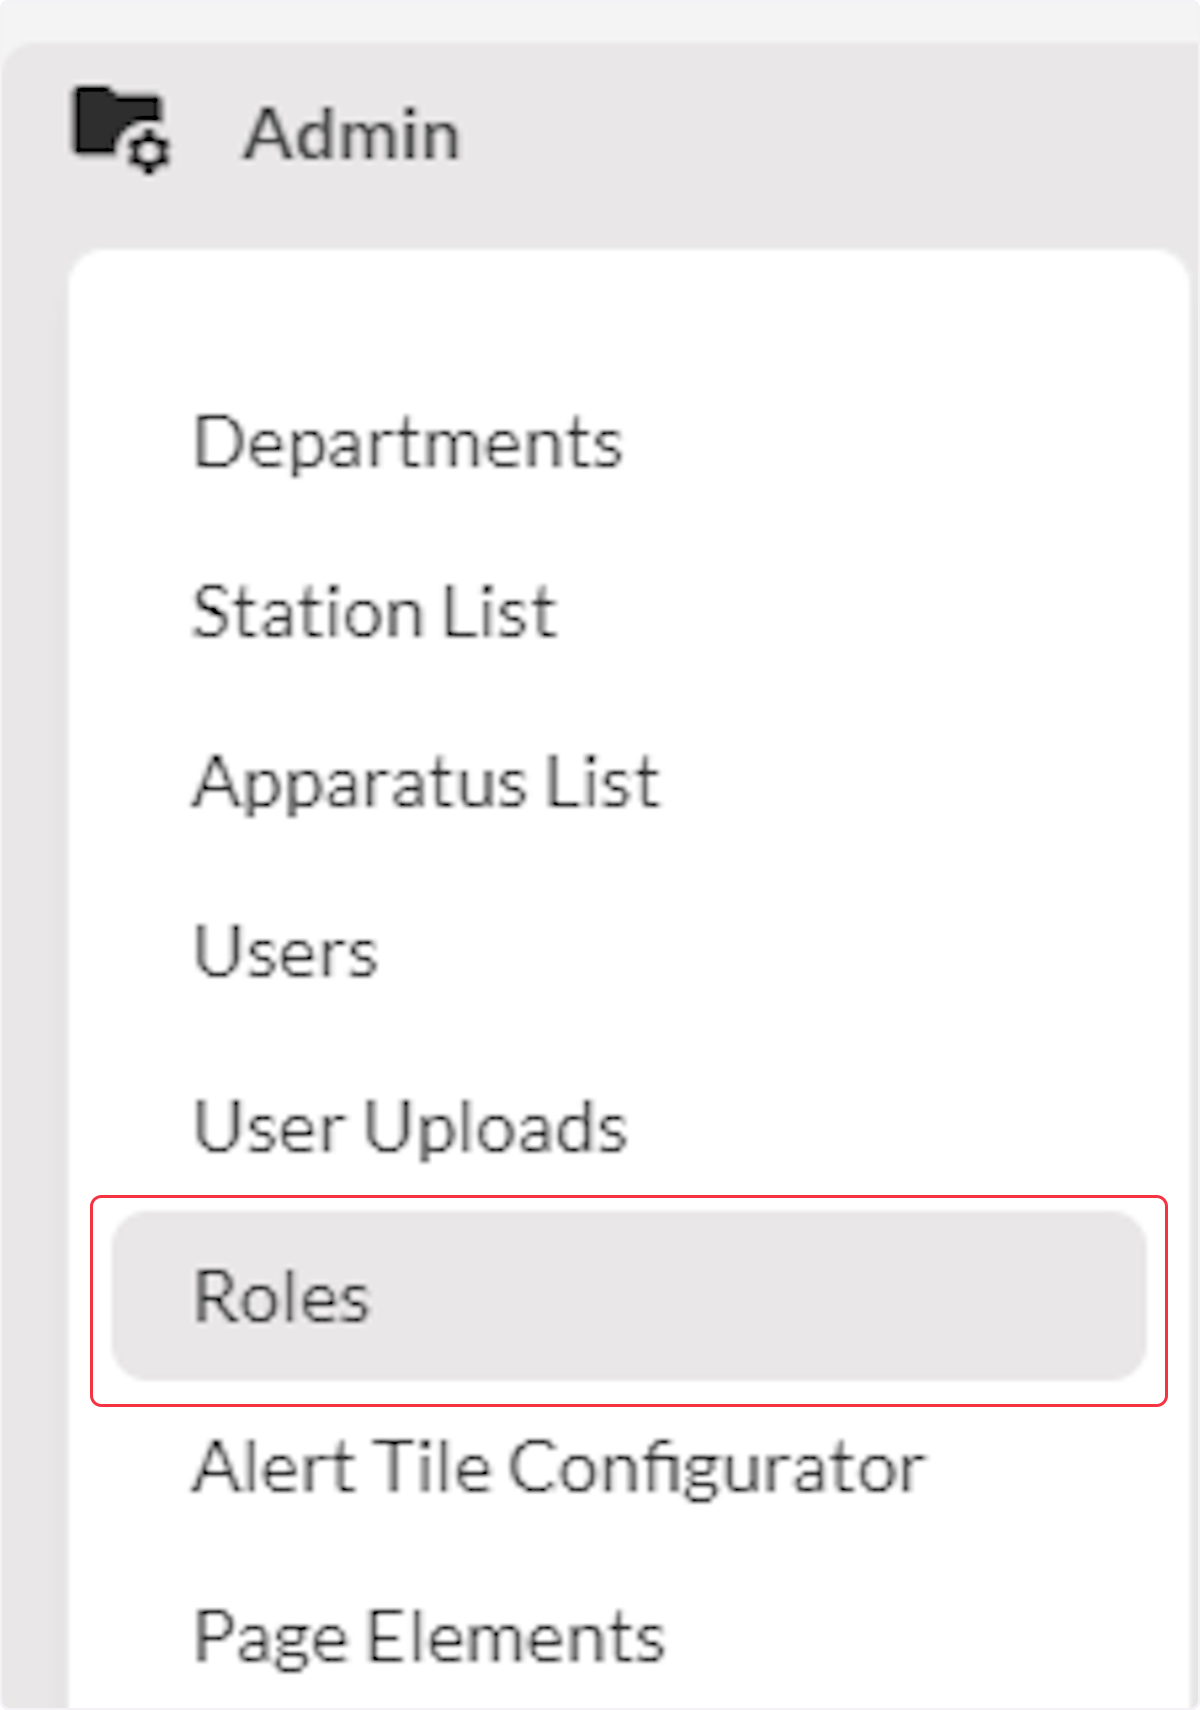 Click on Roles.